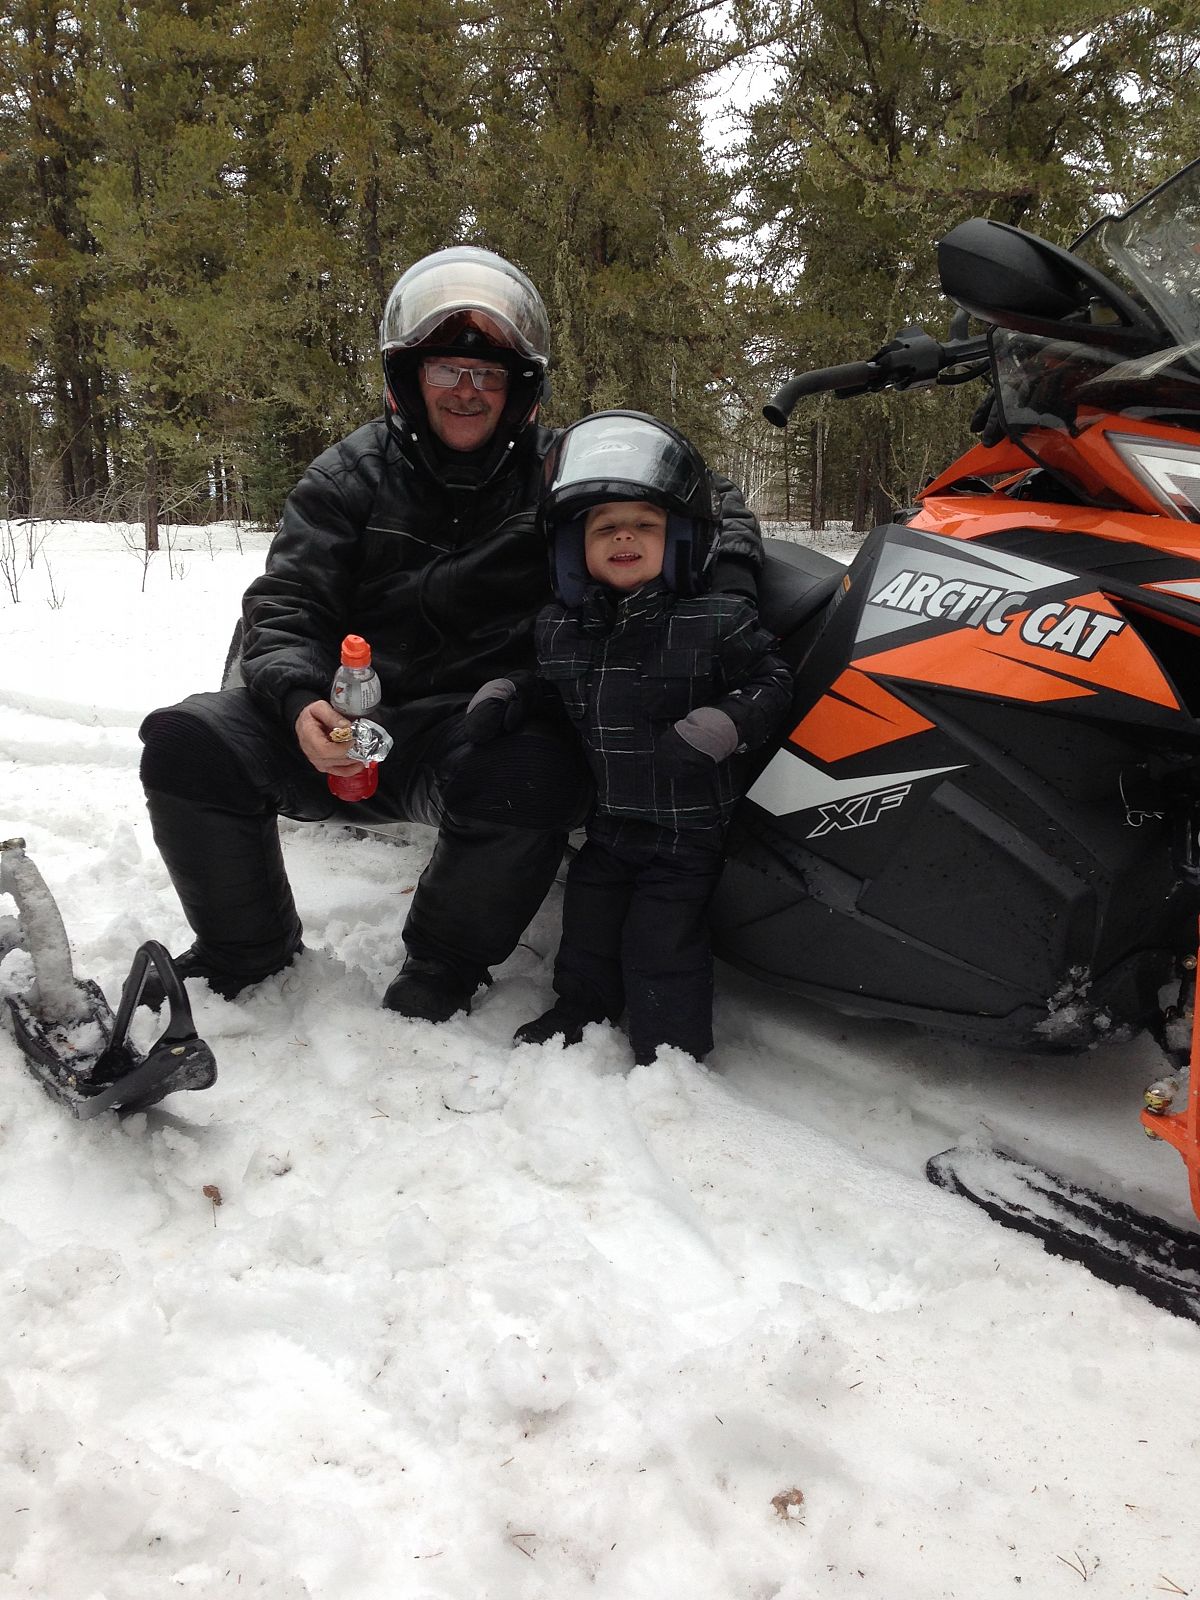 Grandpa and Grandson Ryder Kotelko having a great day snowmobiling